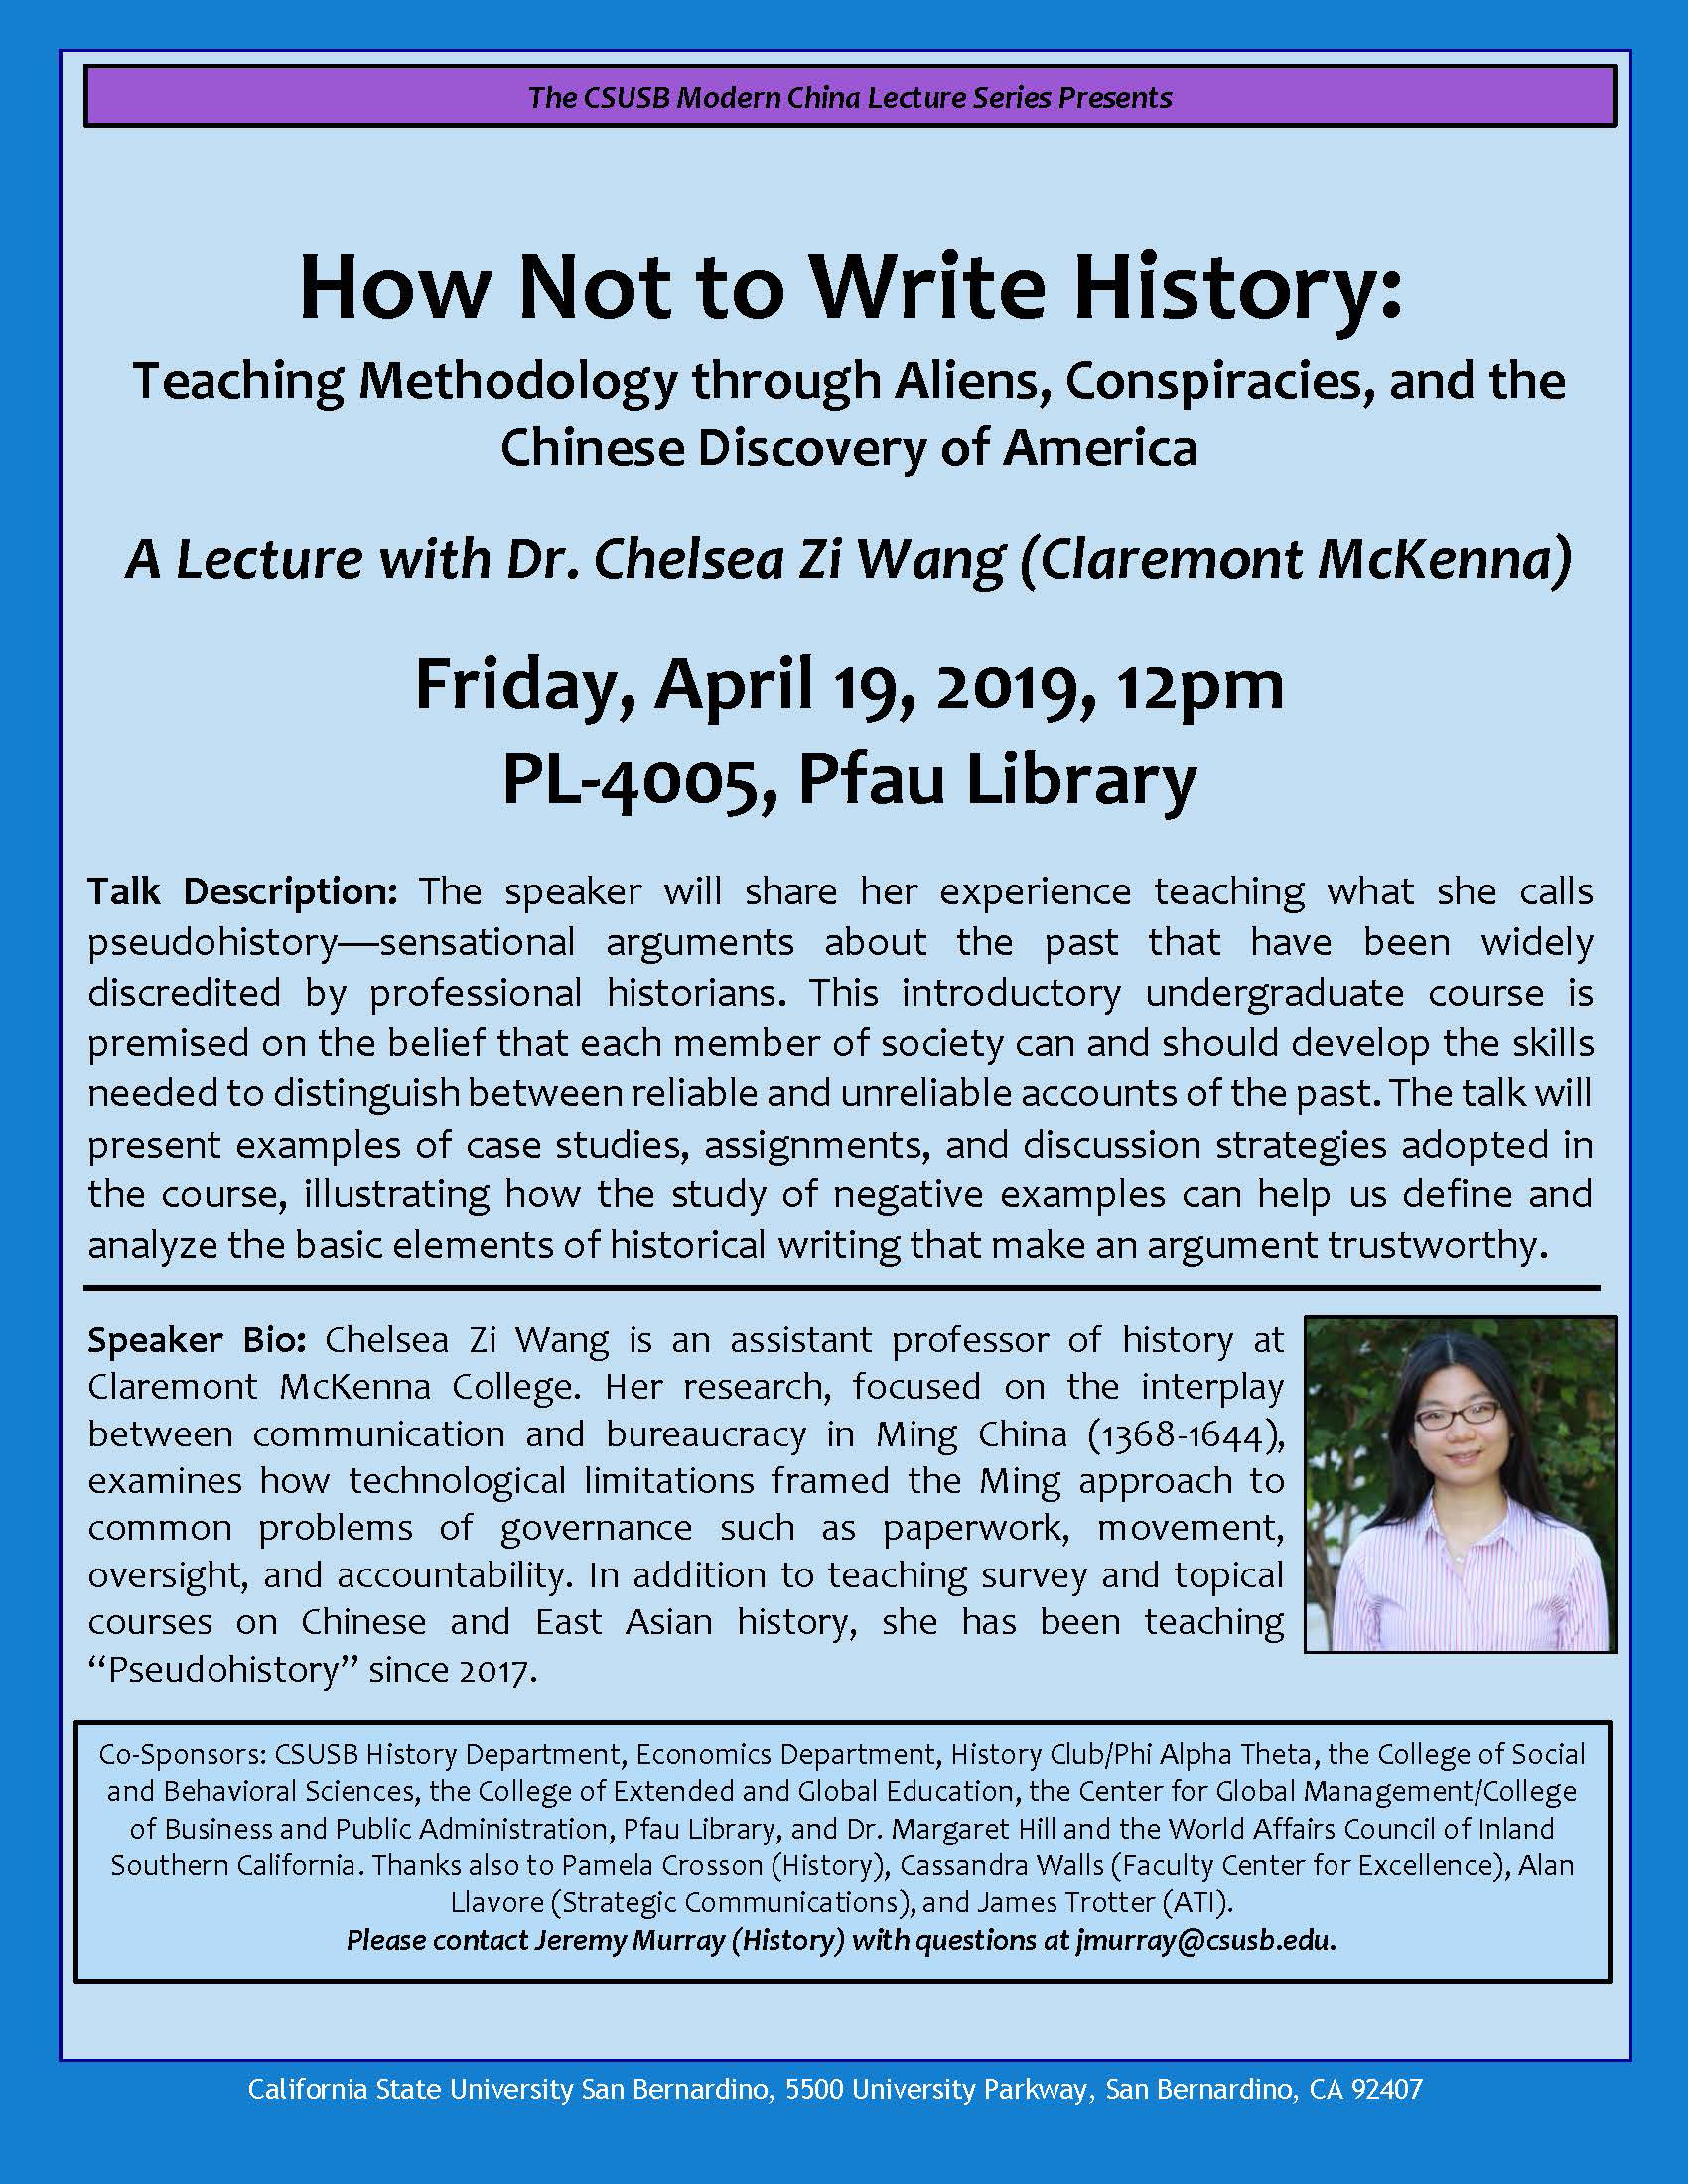 Examination of ‘pseudohistory’ and how to uncover trustworthy accounts focus of next Modern China Lecture